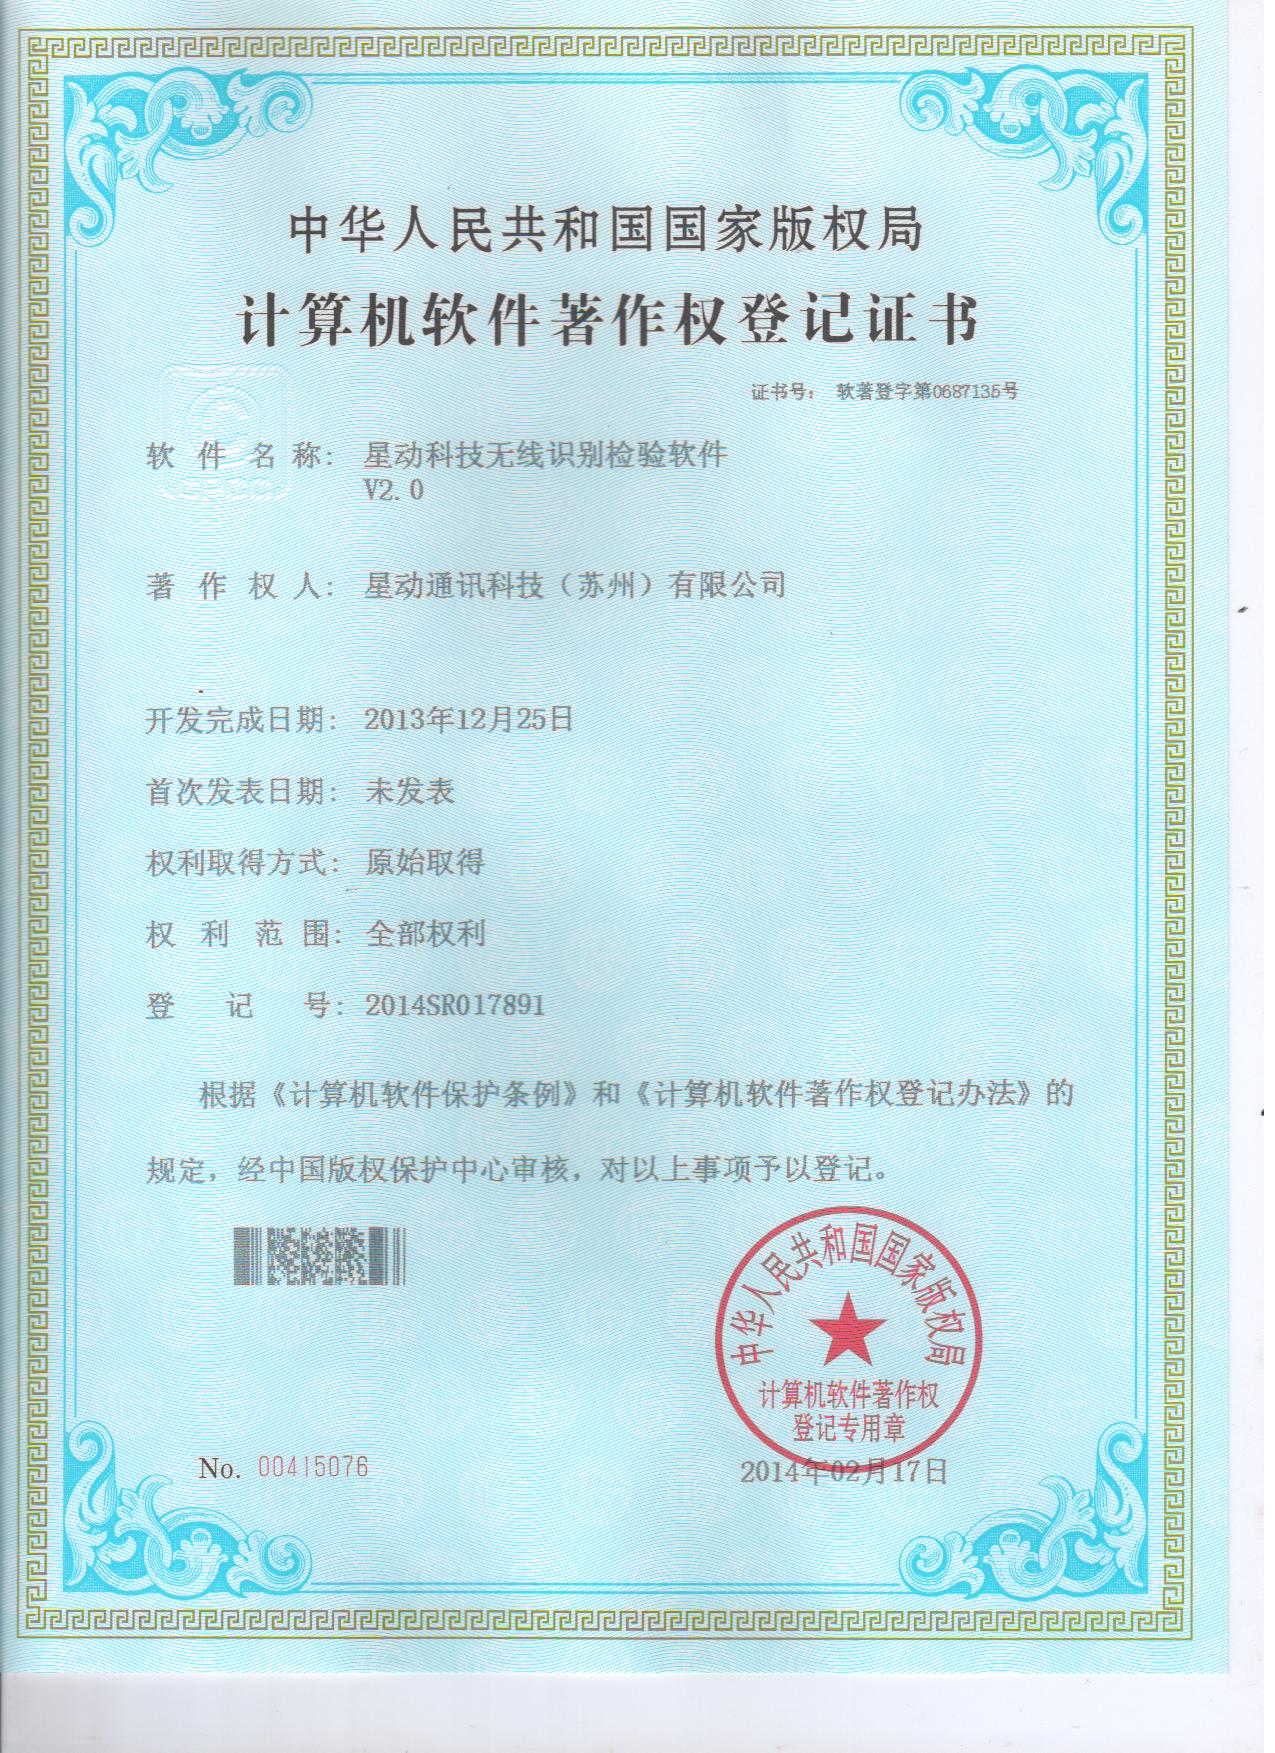 The Copyright certificate of computer software